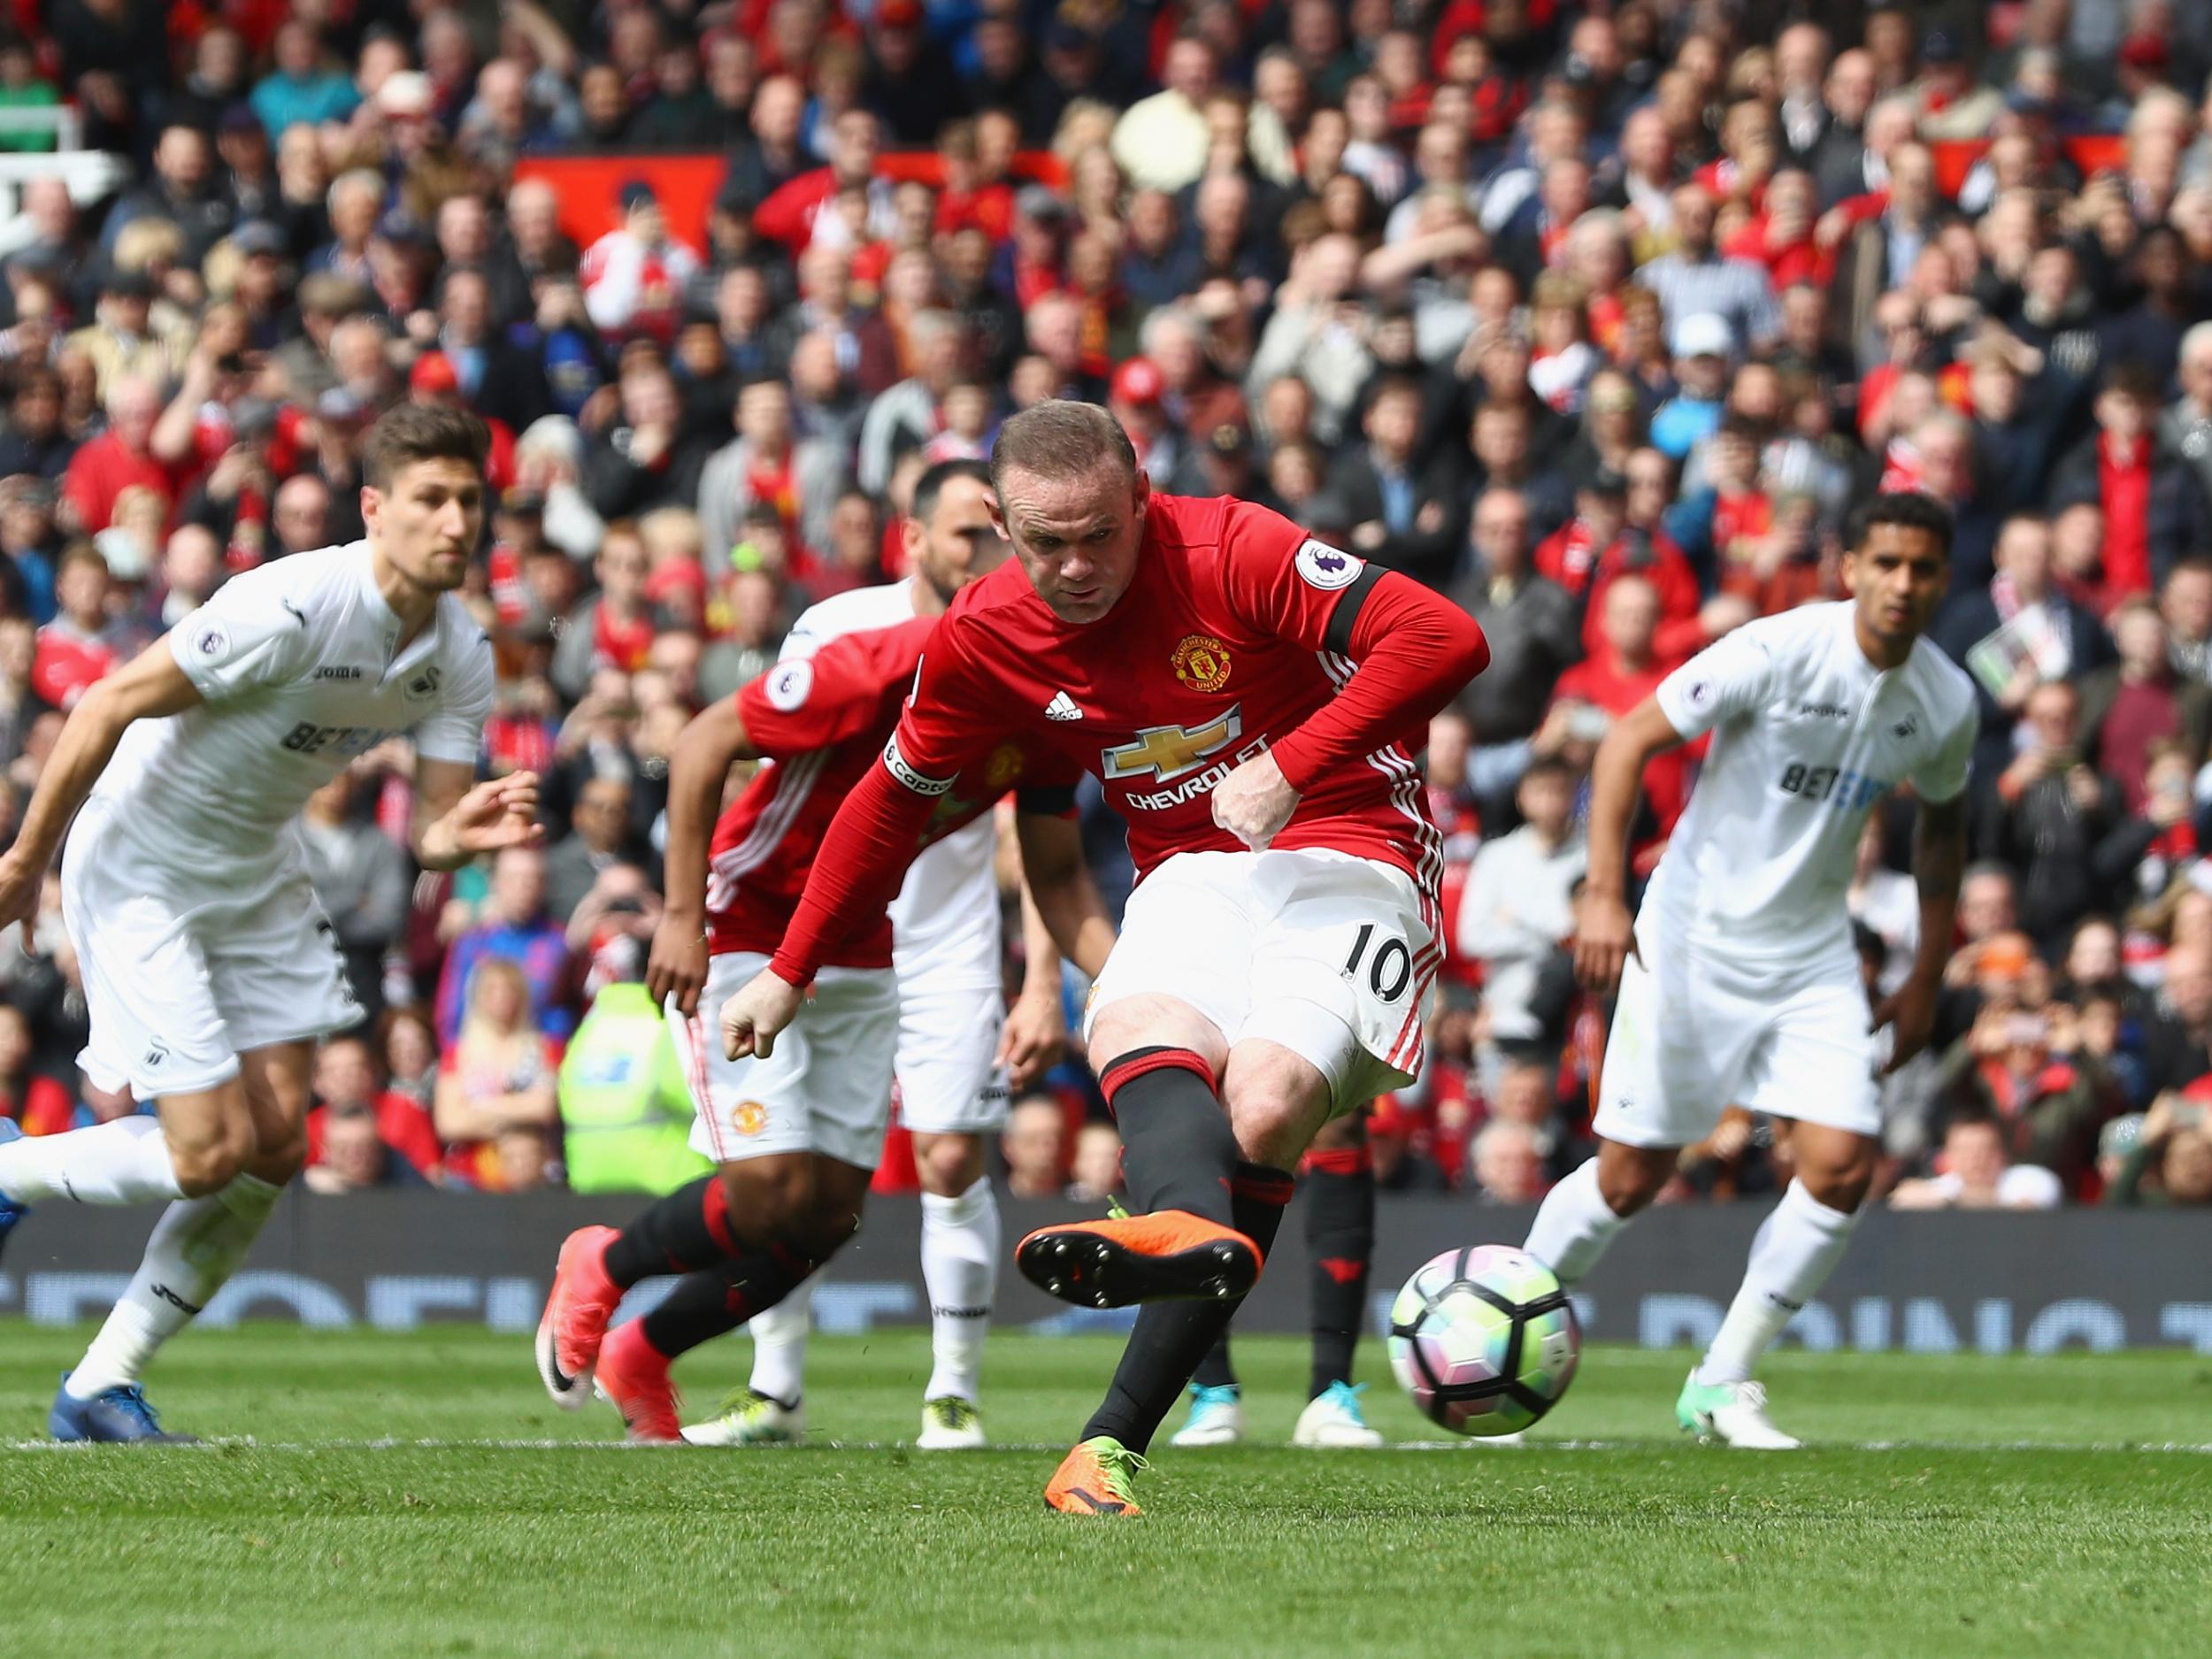 Rooney put United ahead from the spot